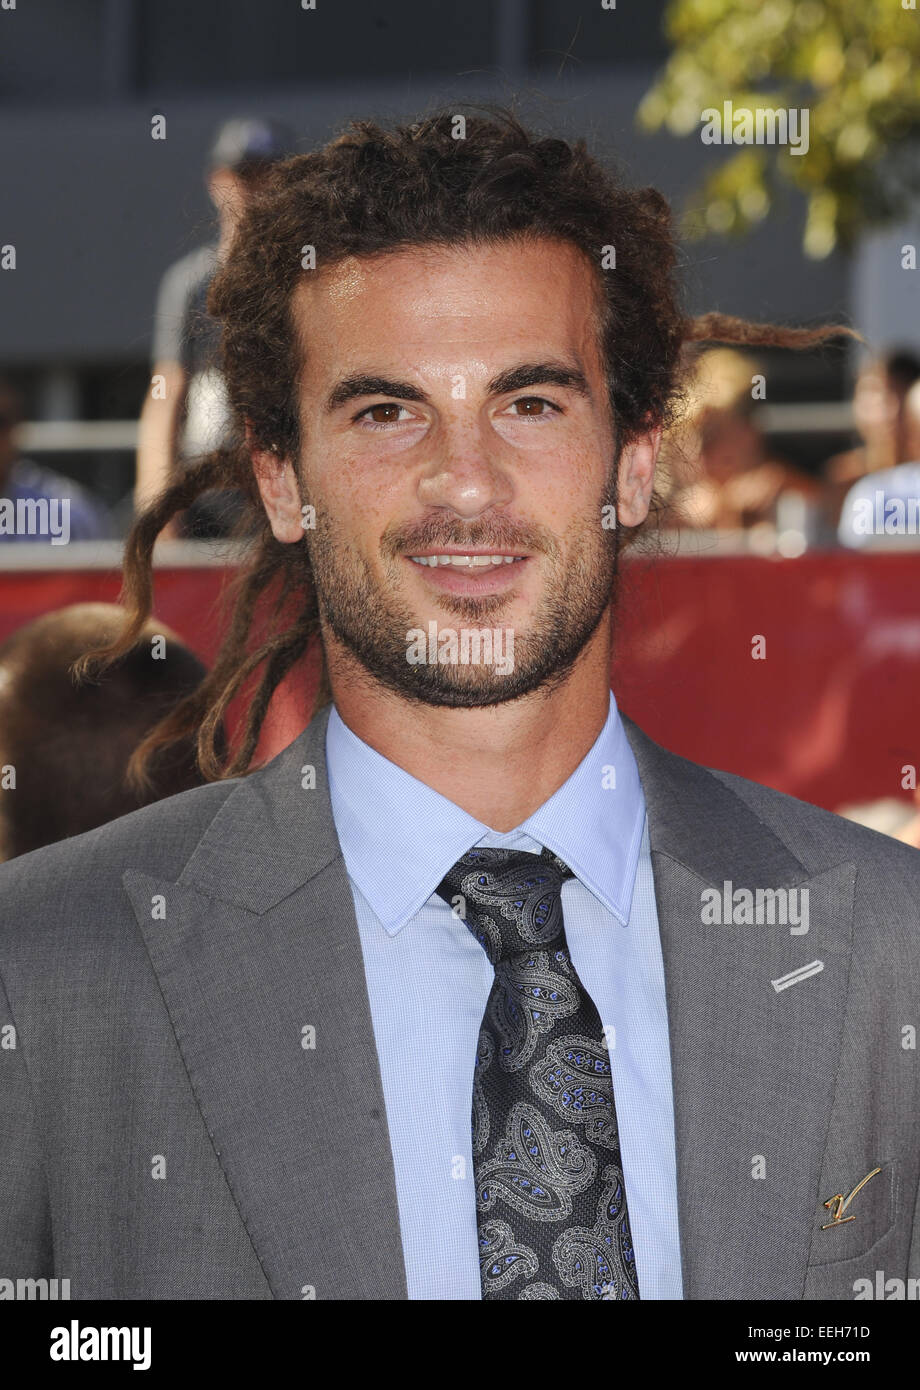 2014 ESPYS Awards - Arrivals  Featuring: Kyle Beckerman Where: Los Angeles, California, United States When: 17 Jul 2014 Stock Photo